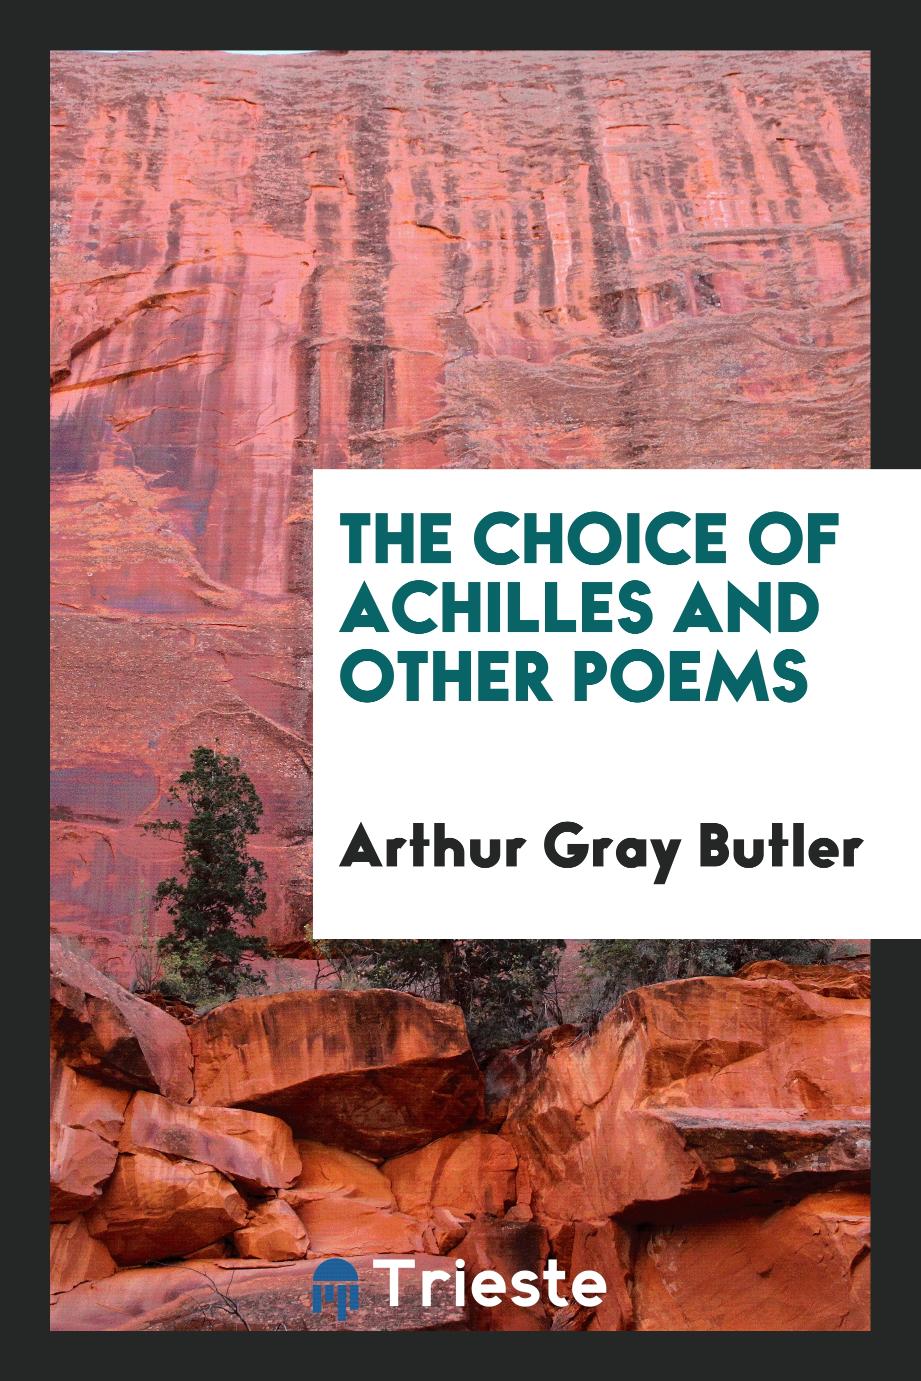 The Choice of Achilles and Other Poems